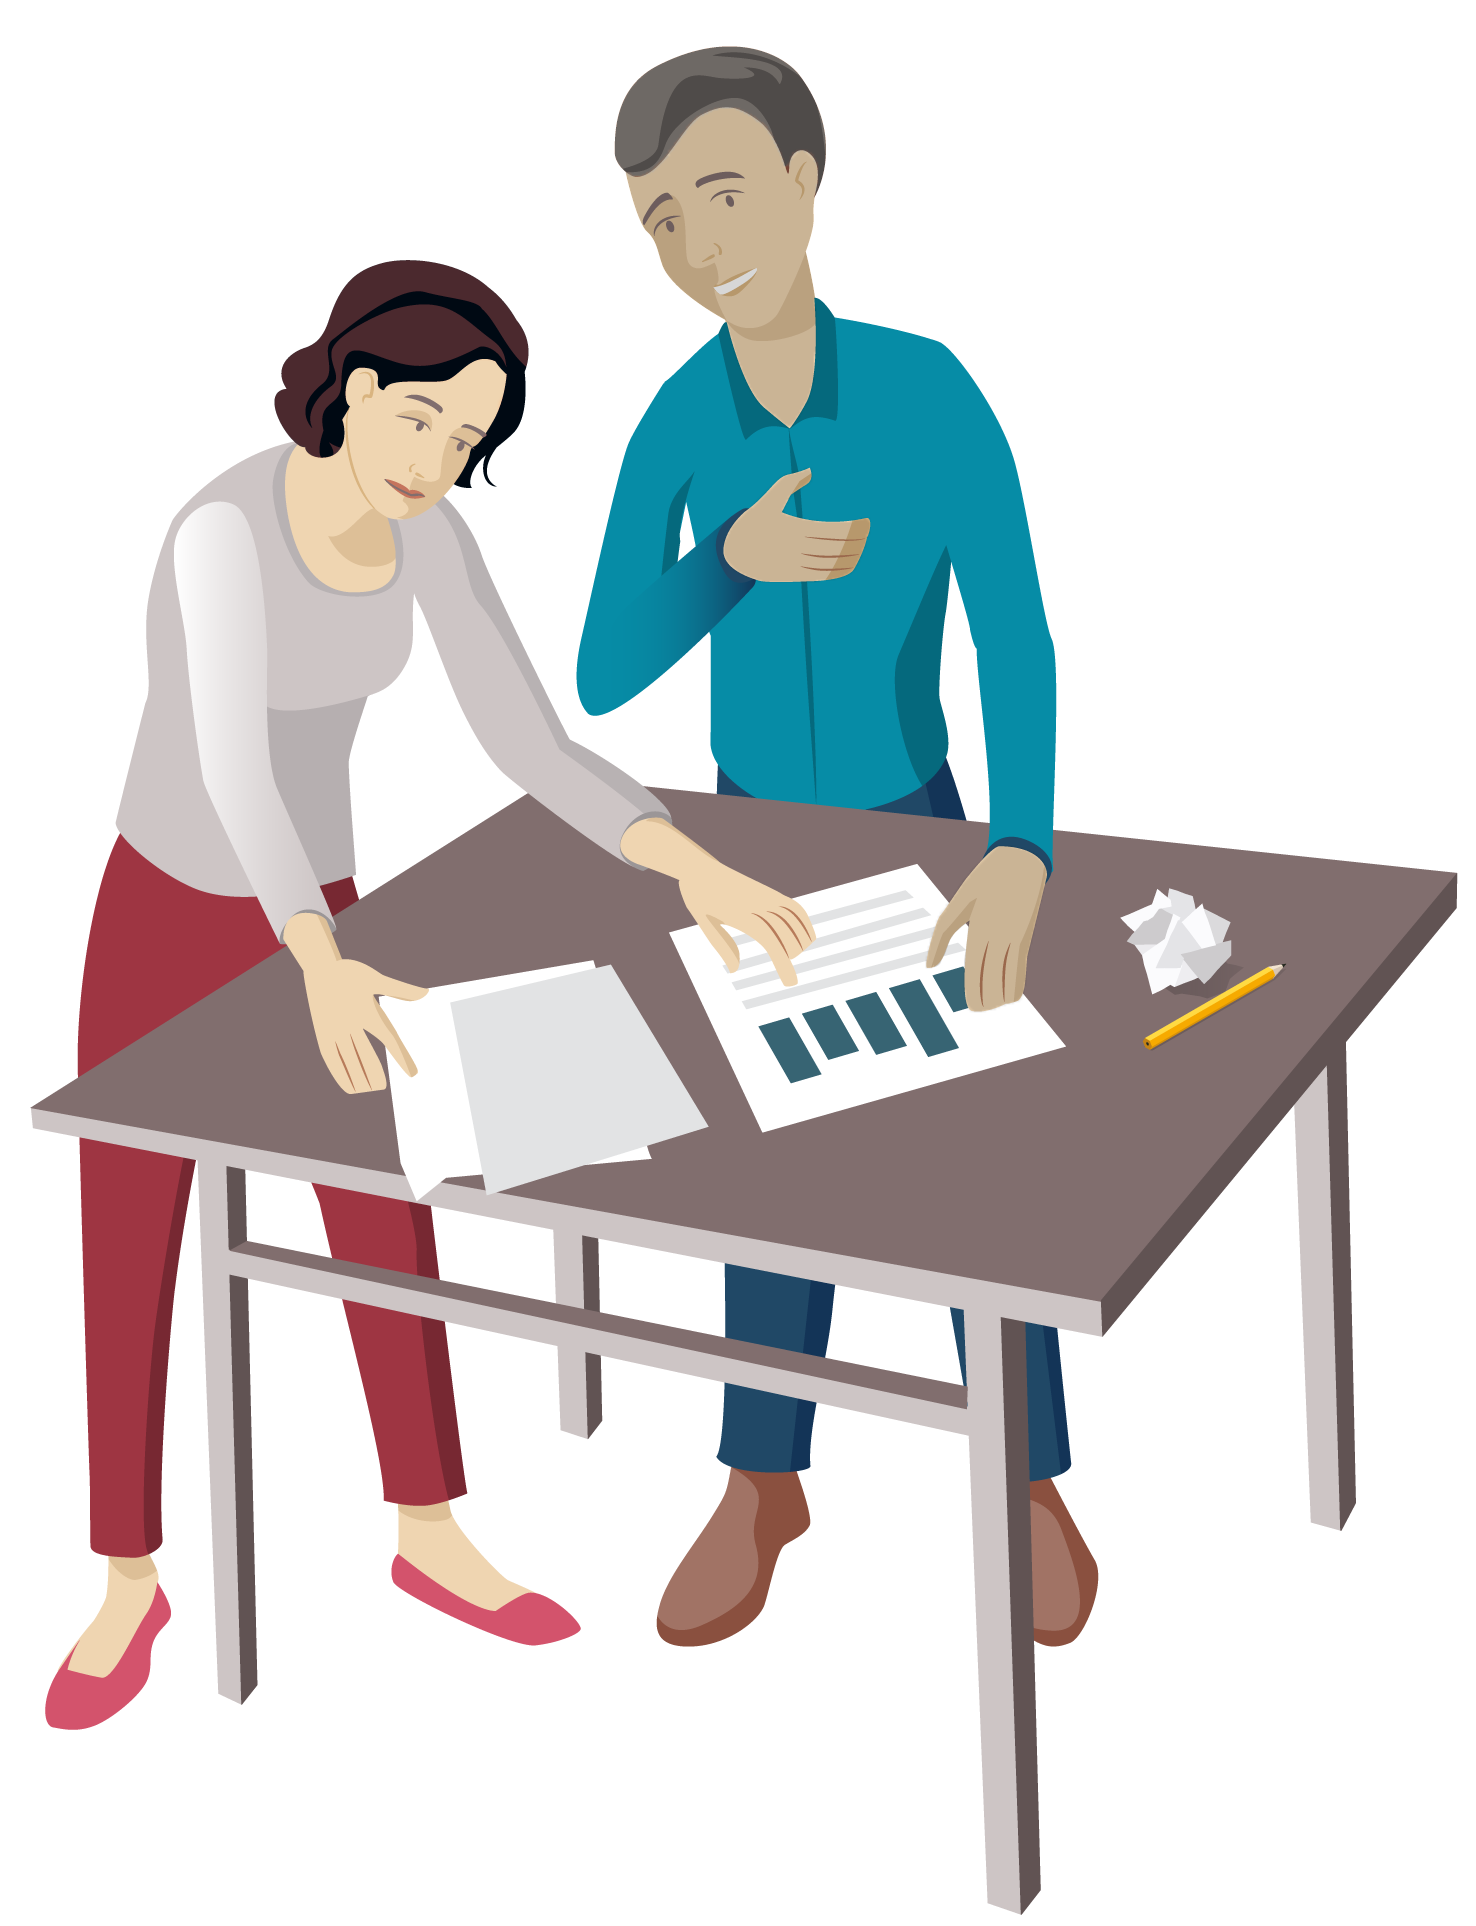 Illustration of two people looking at documents and a graph on a table